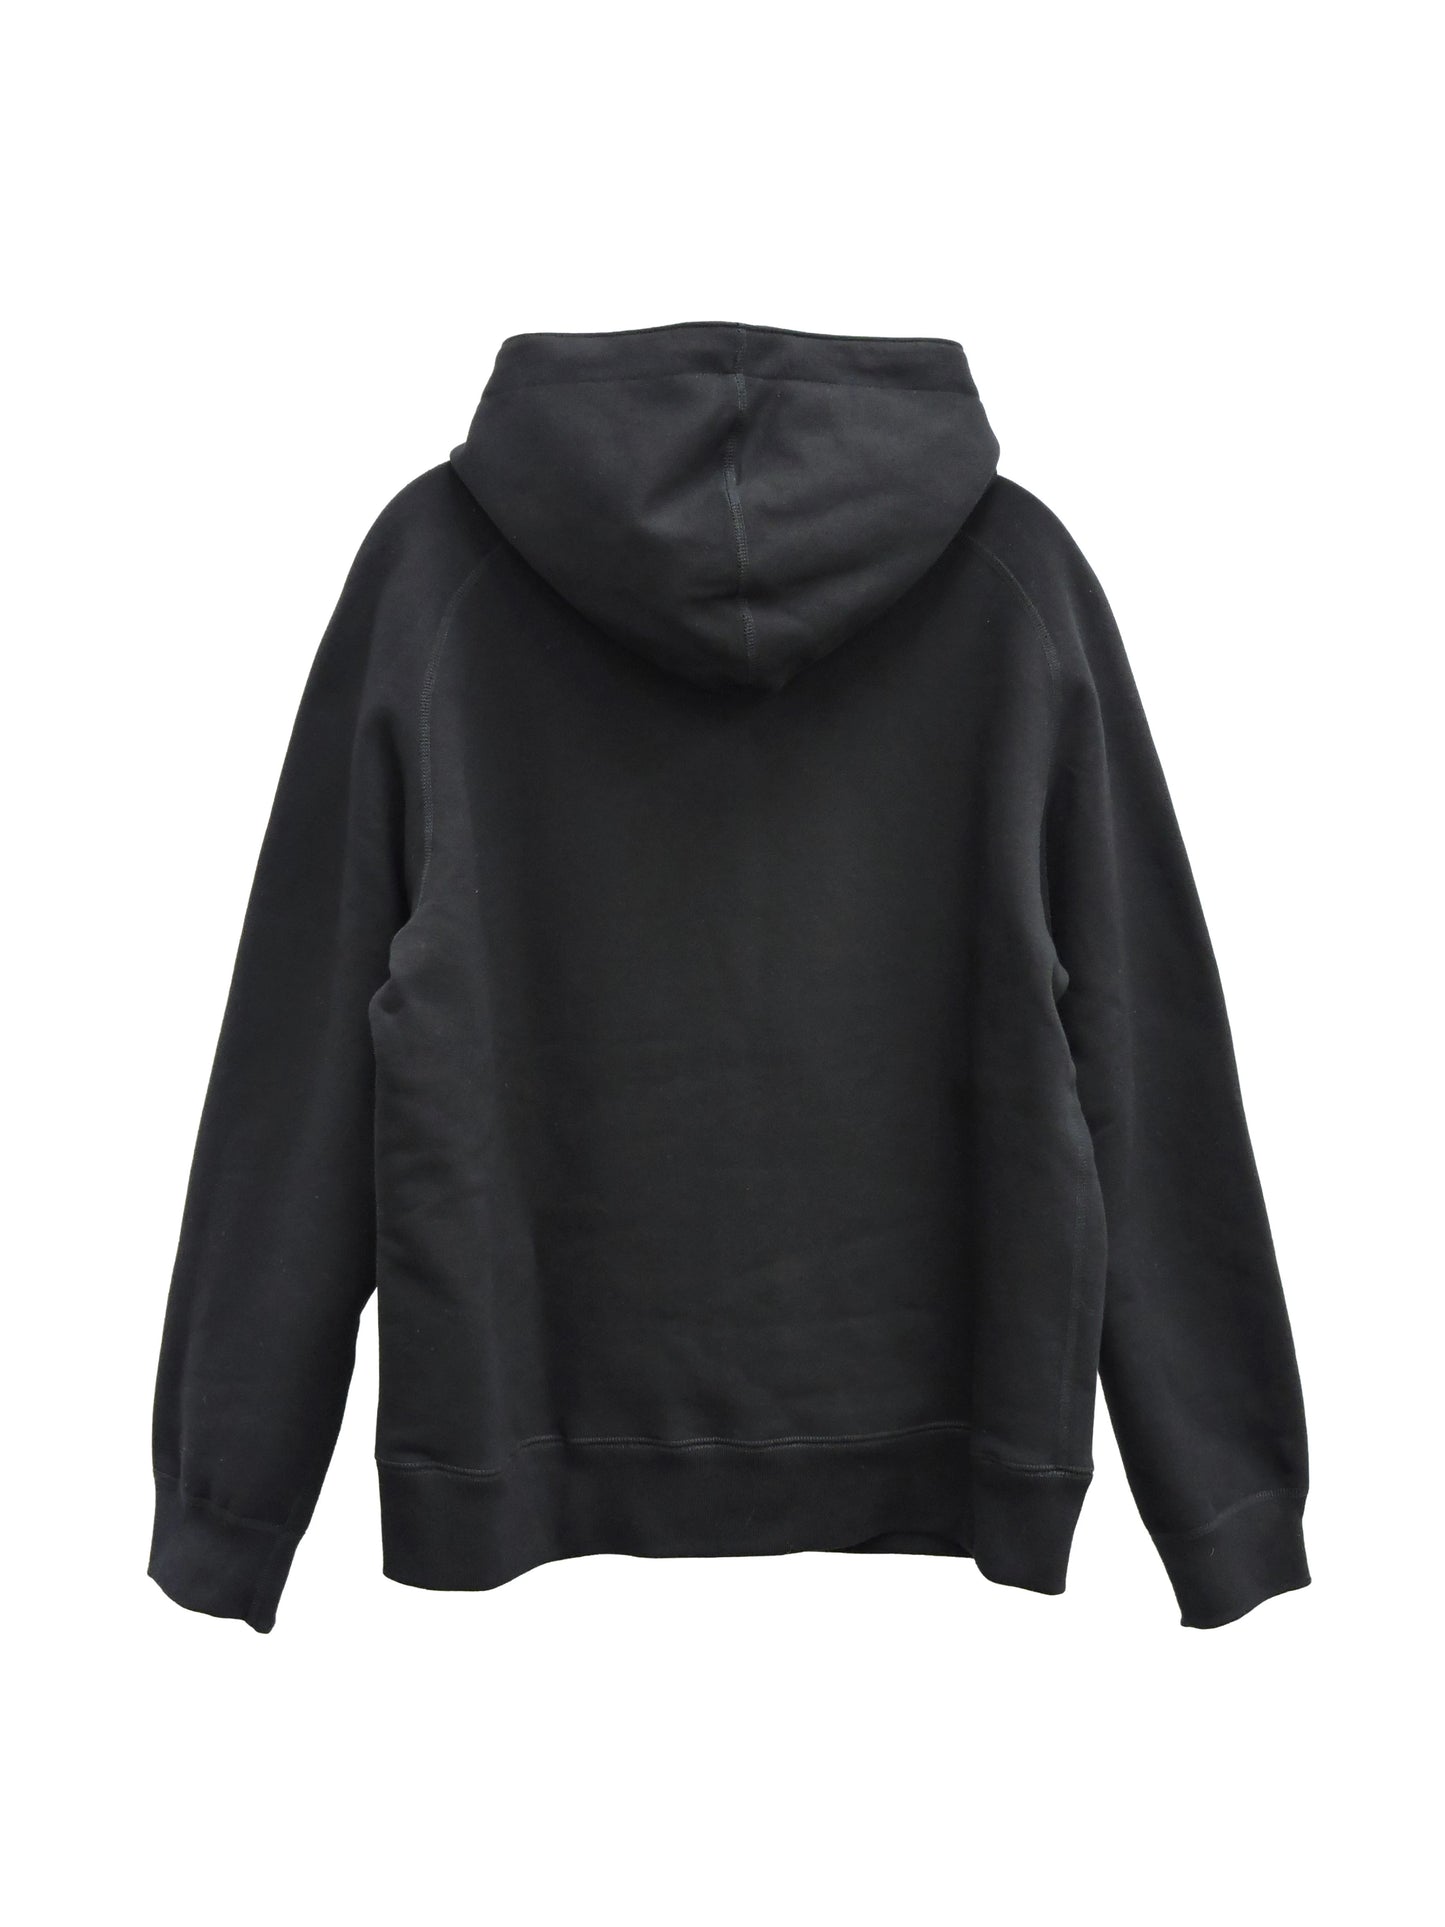 Comfortable Hooded and Non-Hooded Zip-Up Jackets